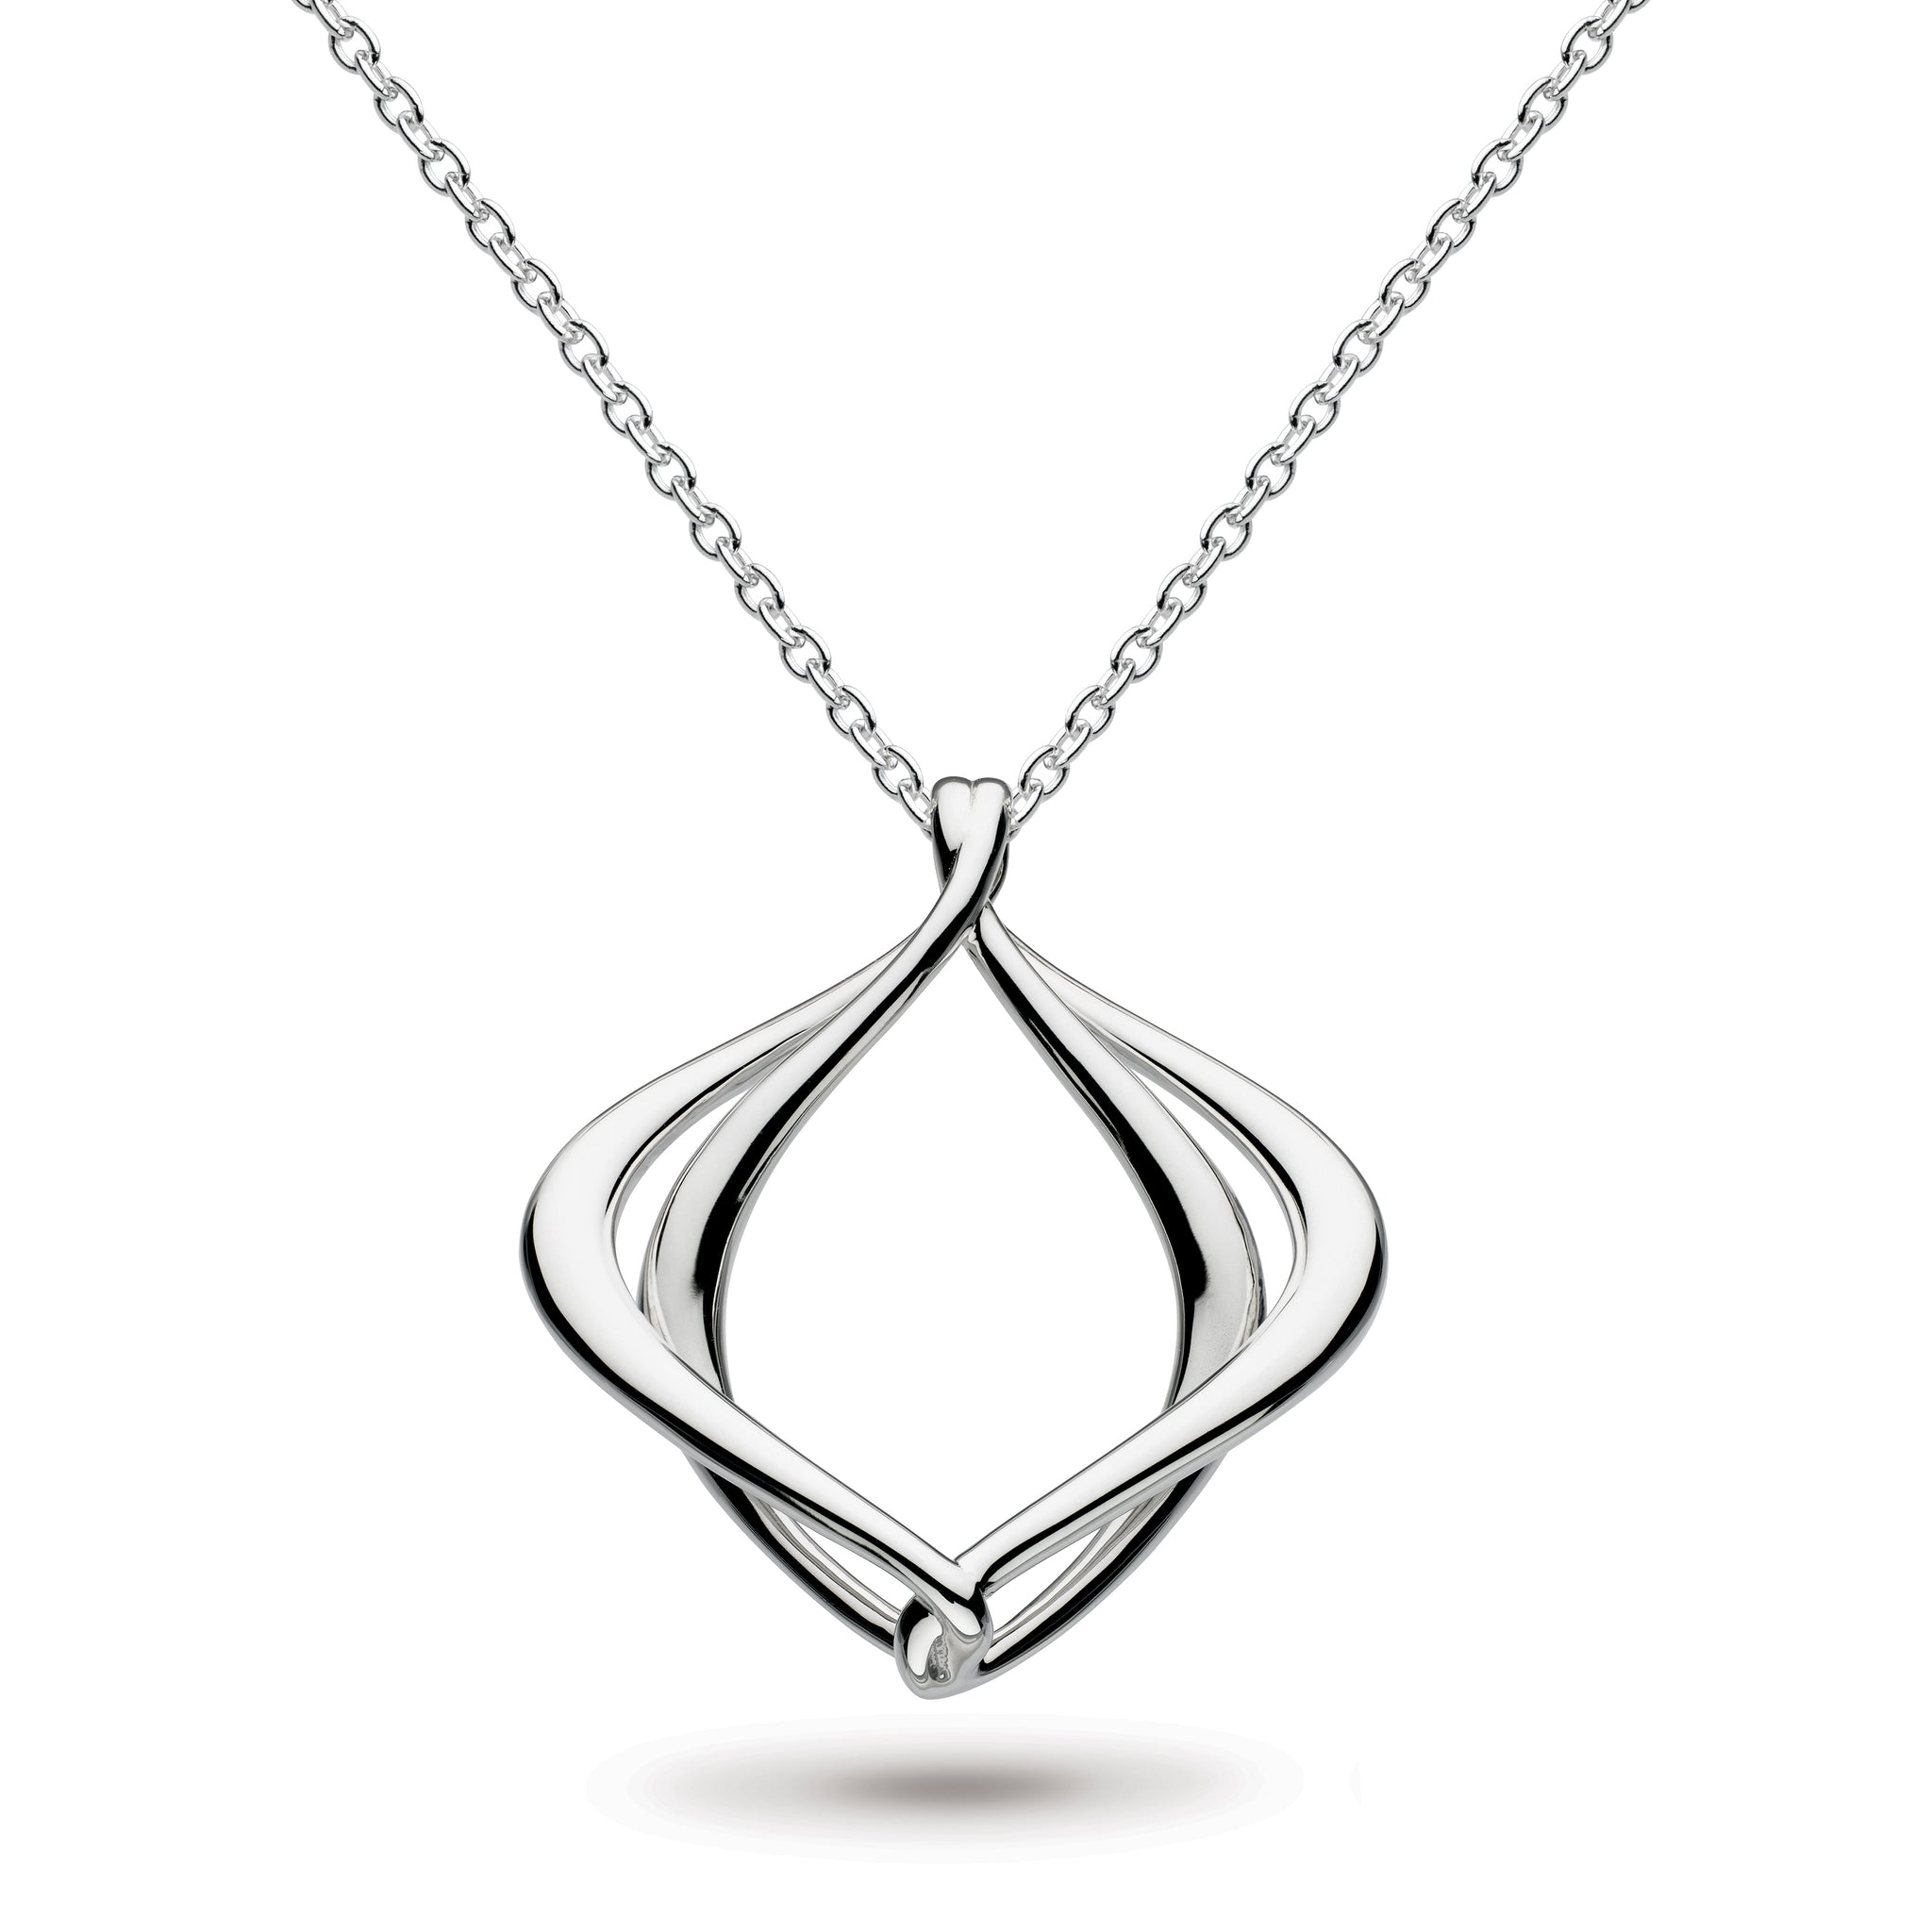 KH Nw Entwine Alicia 18" Necklace